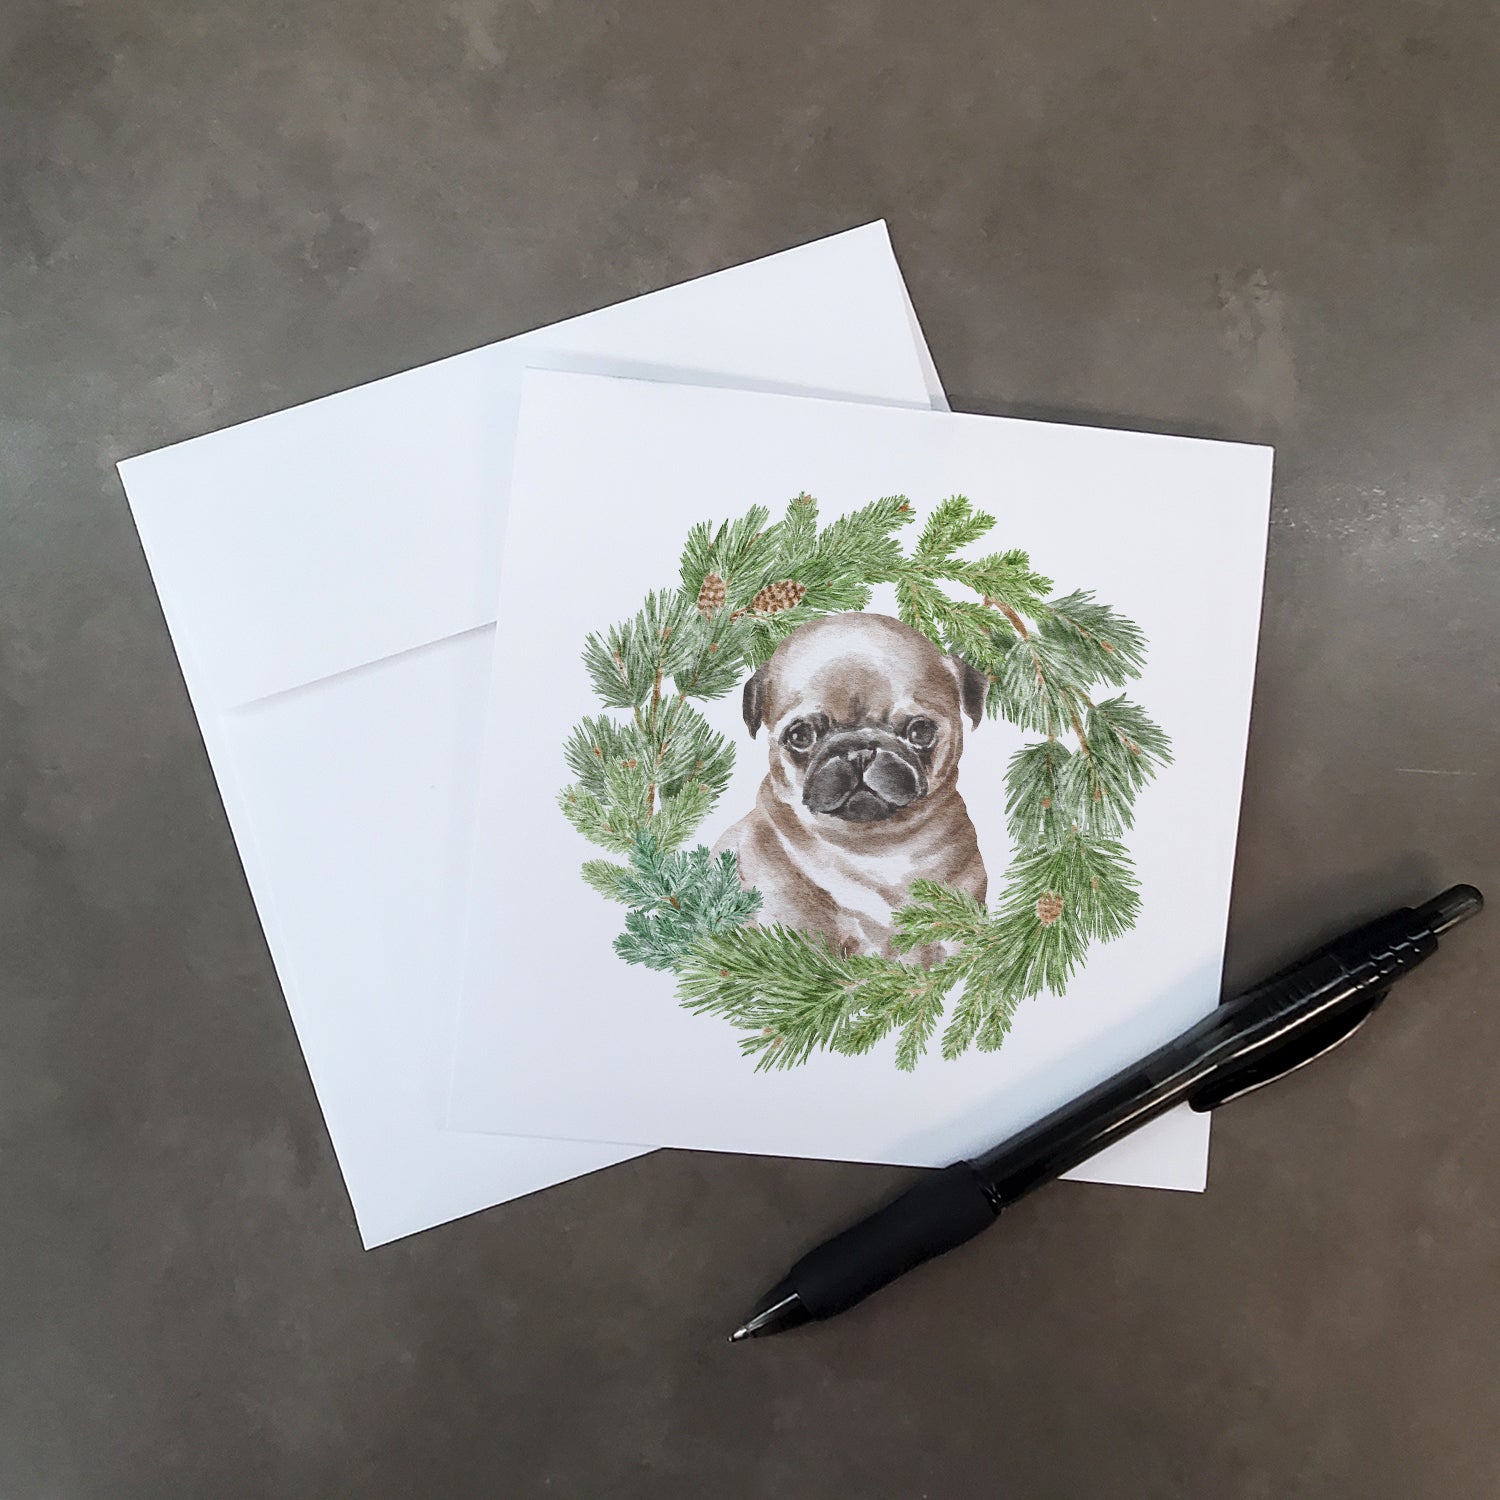 Pug Puppy Fawn Head Tilt with Christmas Wreath Square Greeting Cards and Envelopes Pack of 8 - the-store.com